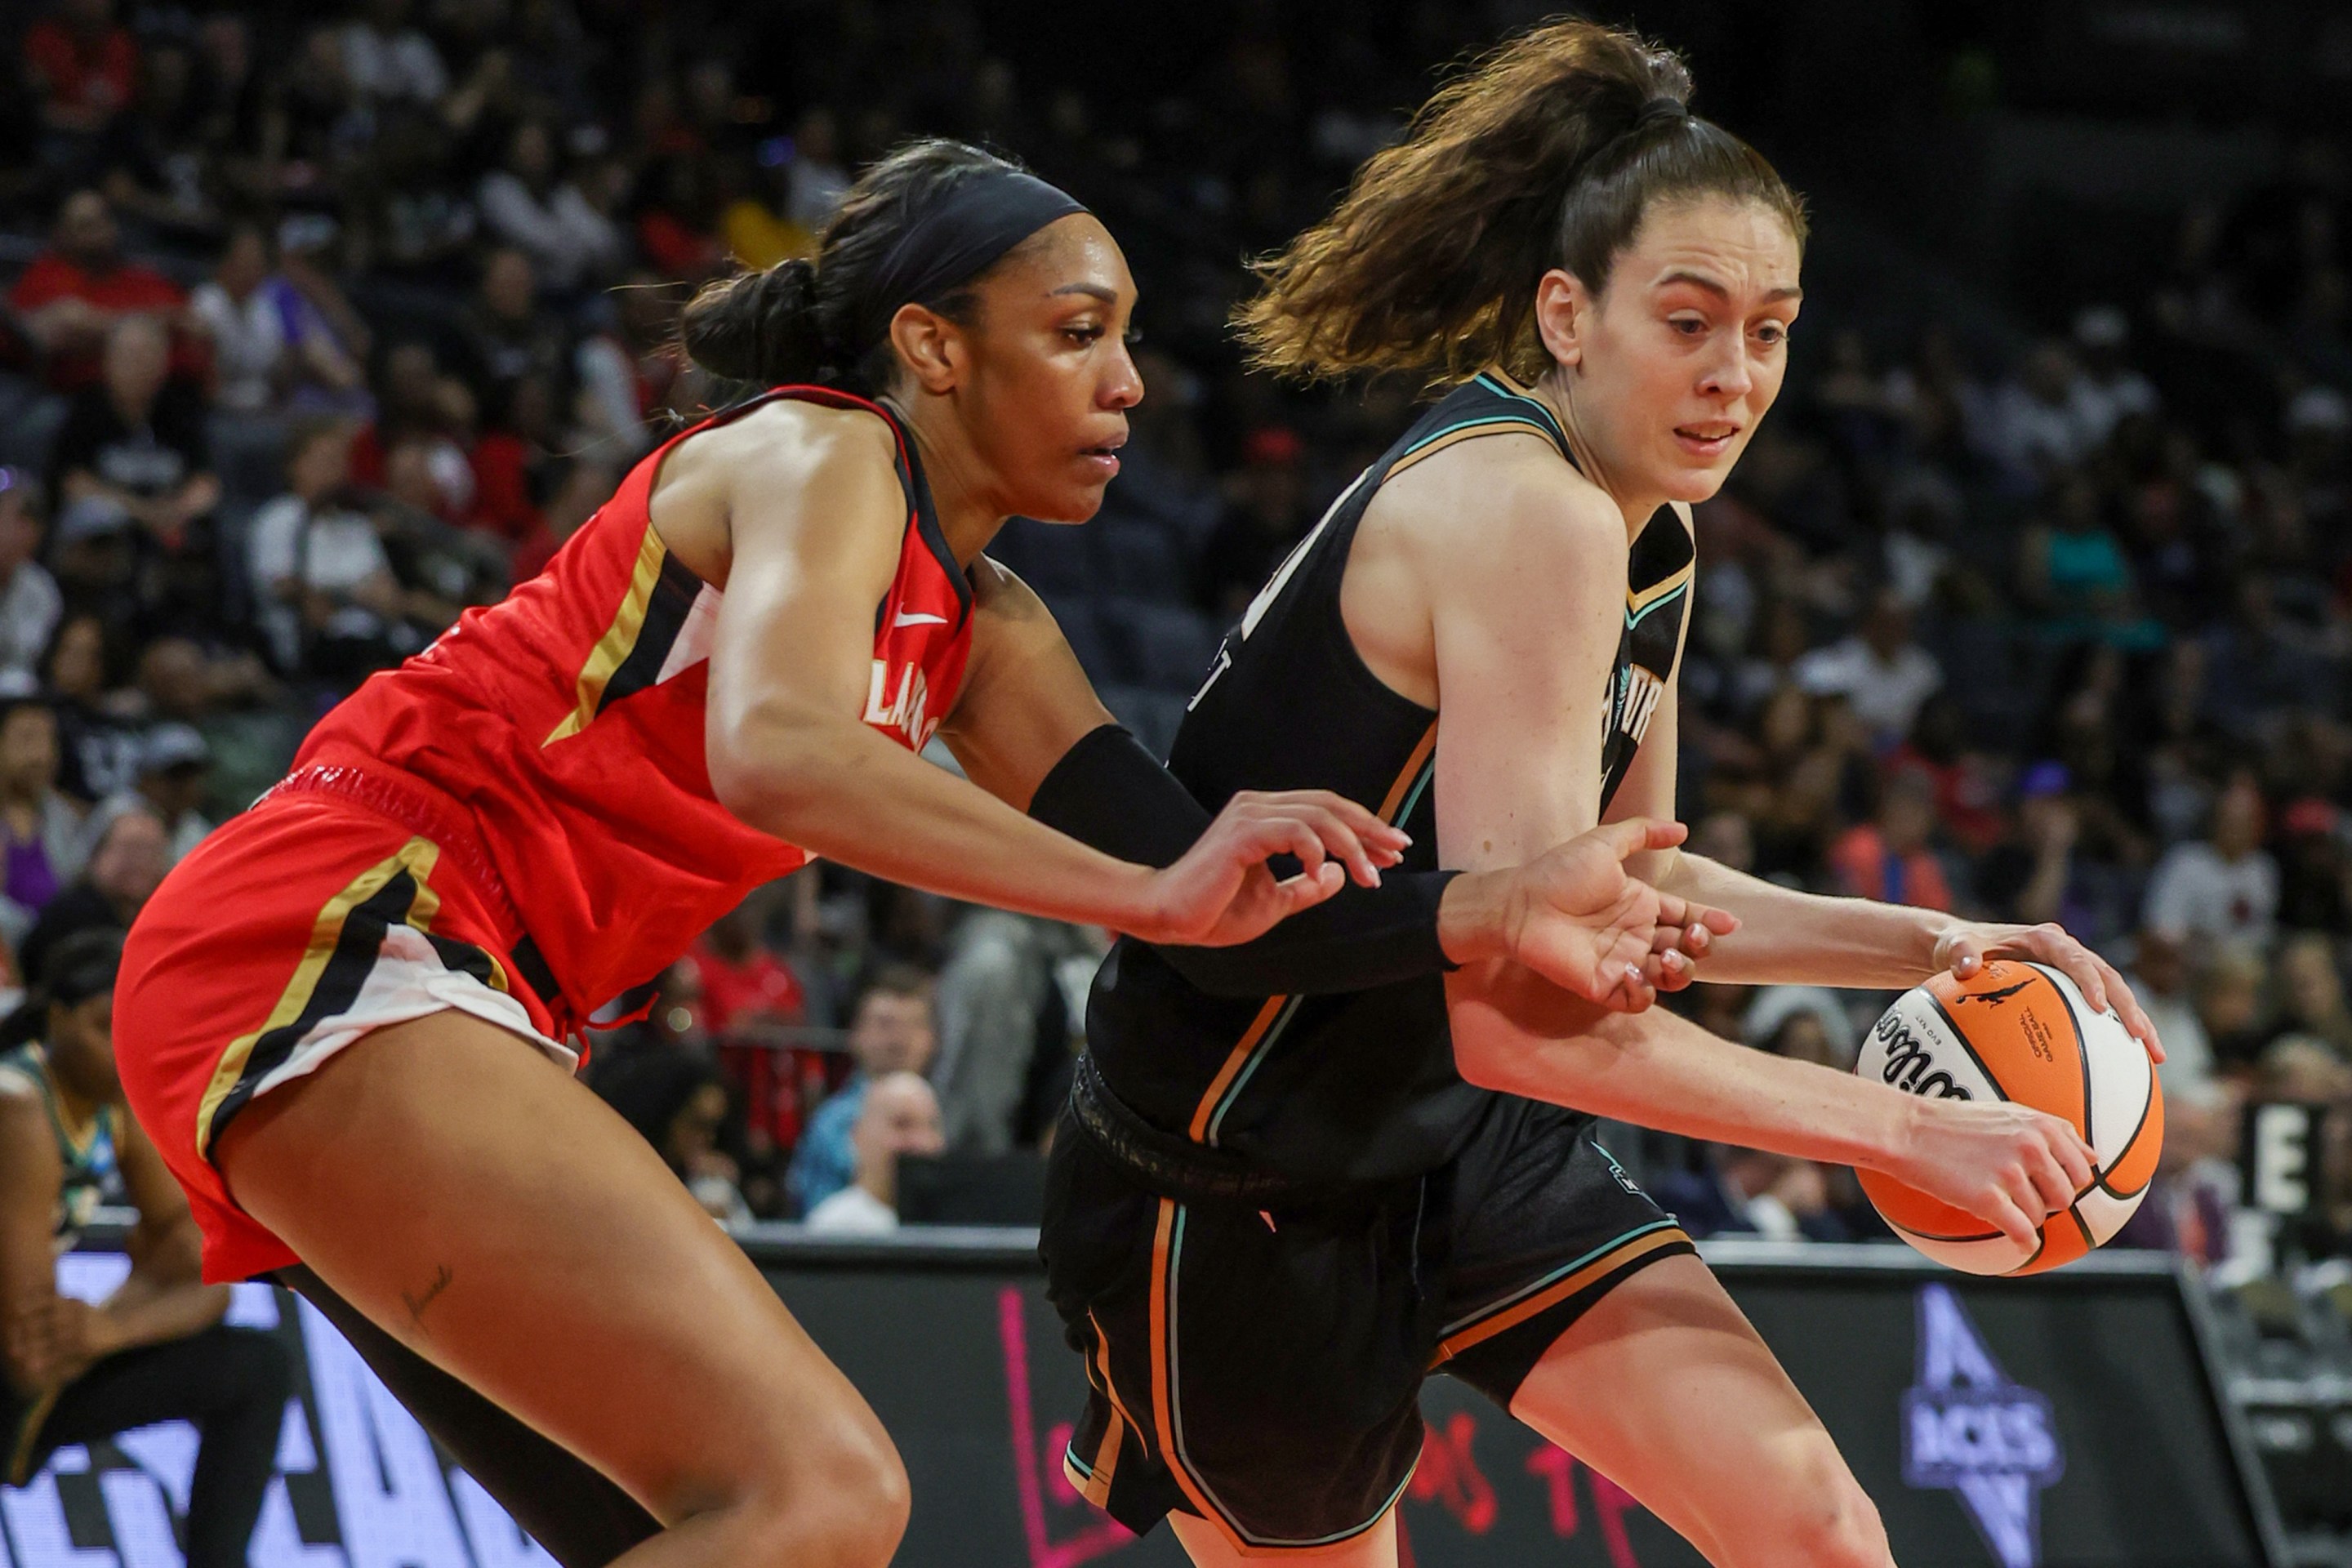 LAS VEGAS, NEVADA - MAY 13: Breanna Stewart #30 of the New York Liberty drives against A'ja Wilson #22 of the Las Vegas Aces in the second quarter of their preseason game at Michelob ULTRA Arena on May 13, 2023 in Las Vegas, Nevada. The Aces defeated the Liberty 84-77.